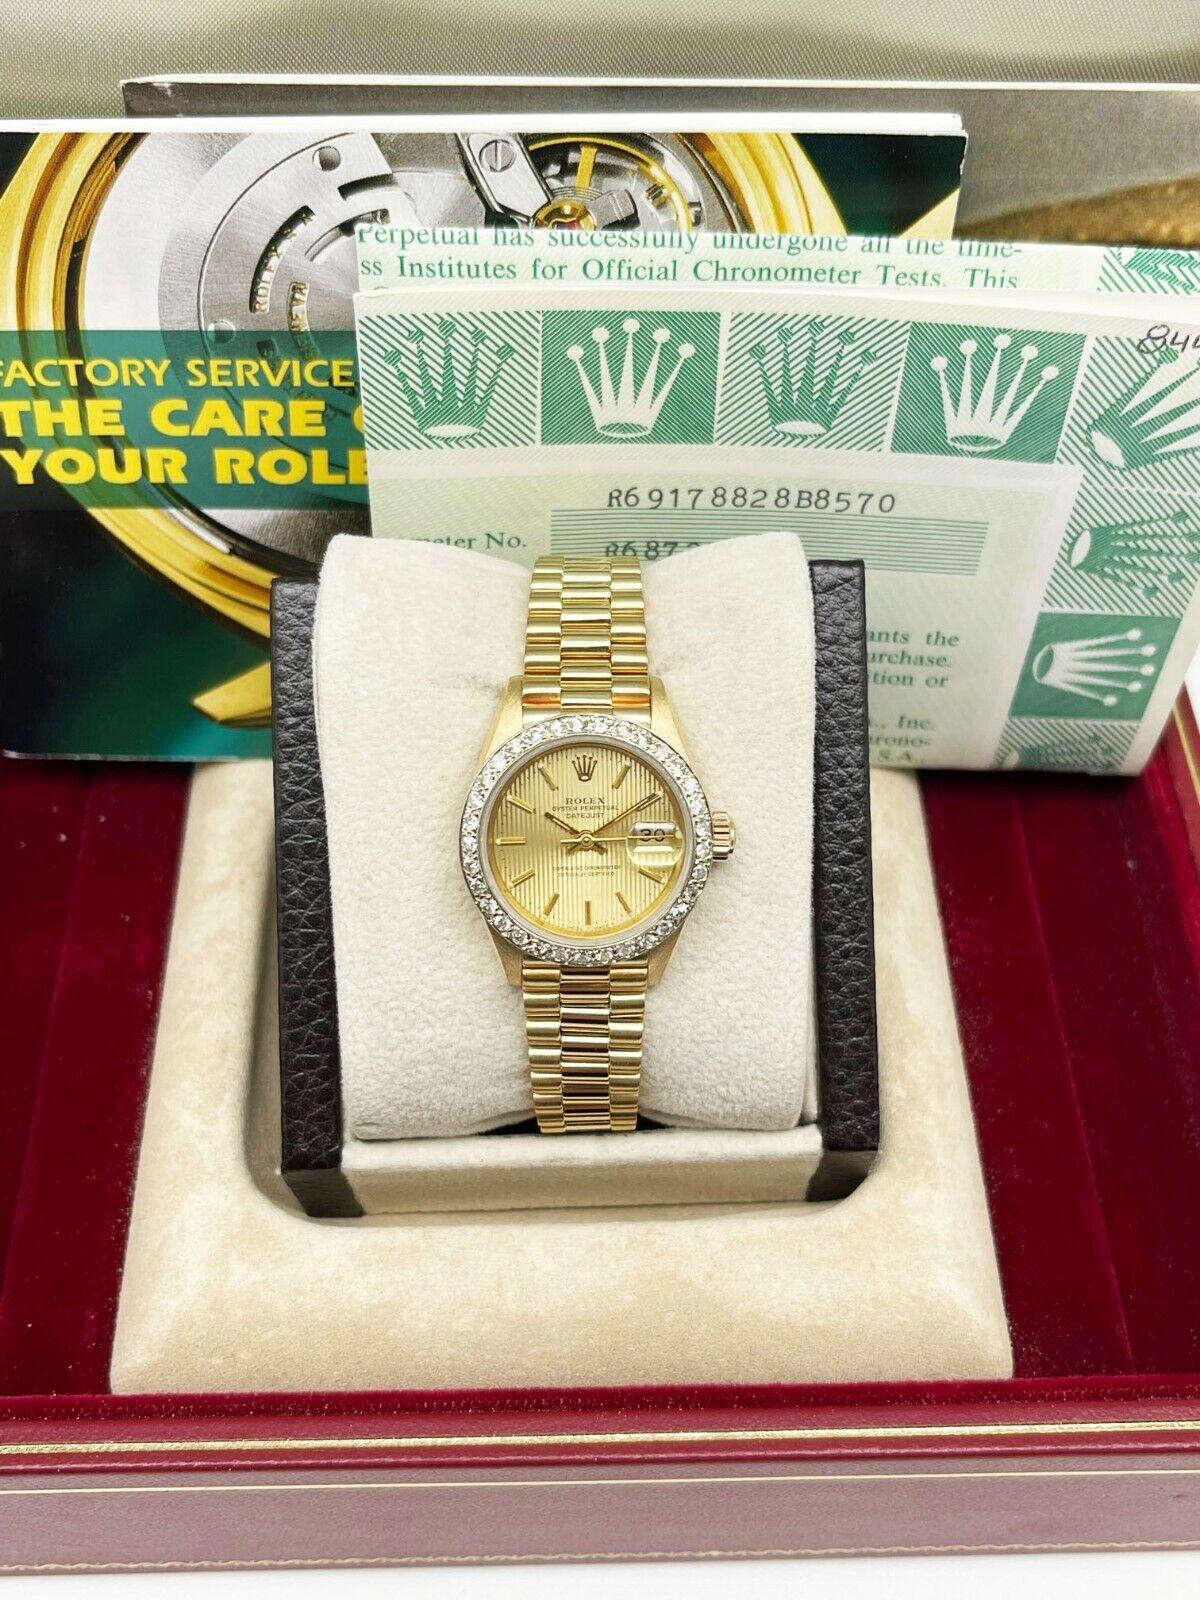 Style Number: 69178

 

Serial: R687***



Model: Ladies President Datejust

 

Case Material: 18K Yellow Gold

 

Band: 18K Yellow Gold

 

Bezel: Custom Diamond bezel

 

Dial: Champagne Tapestry Dial

 

Face: Sapphire Crystal

 

Case Size: